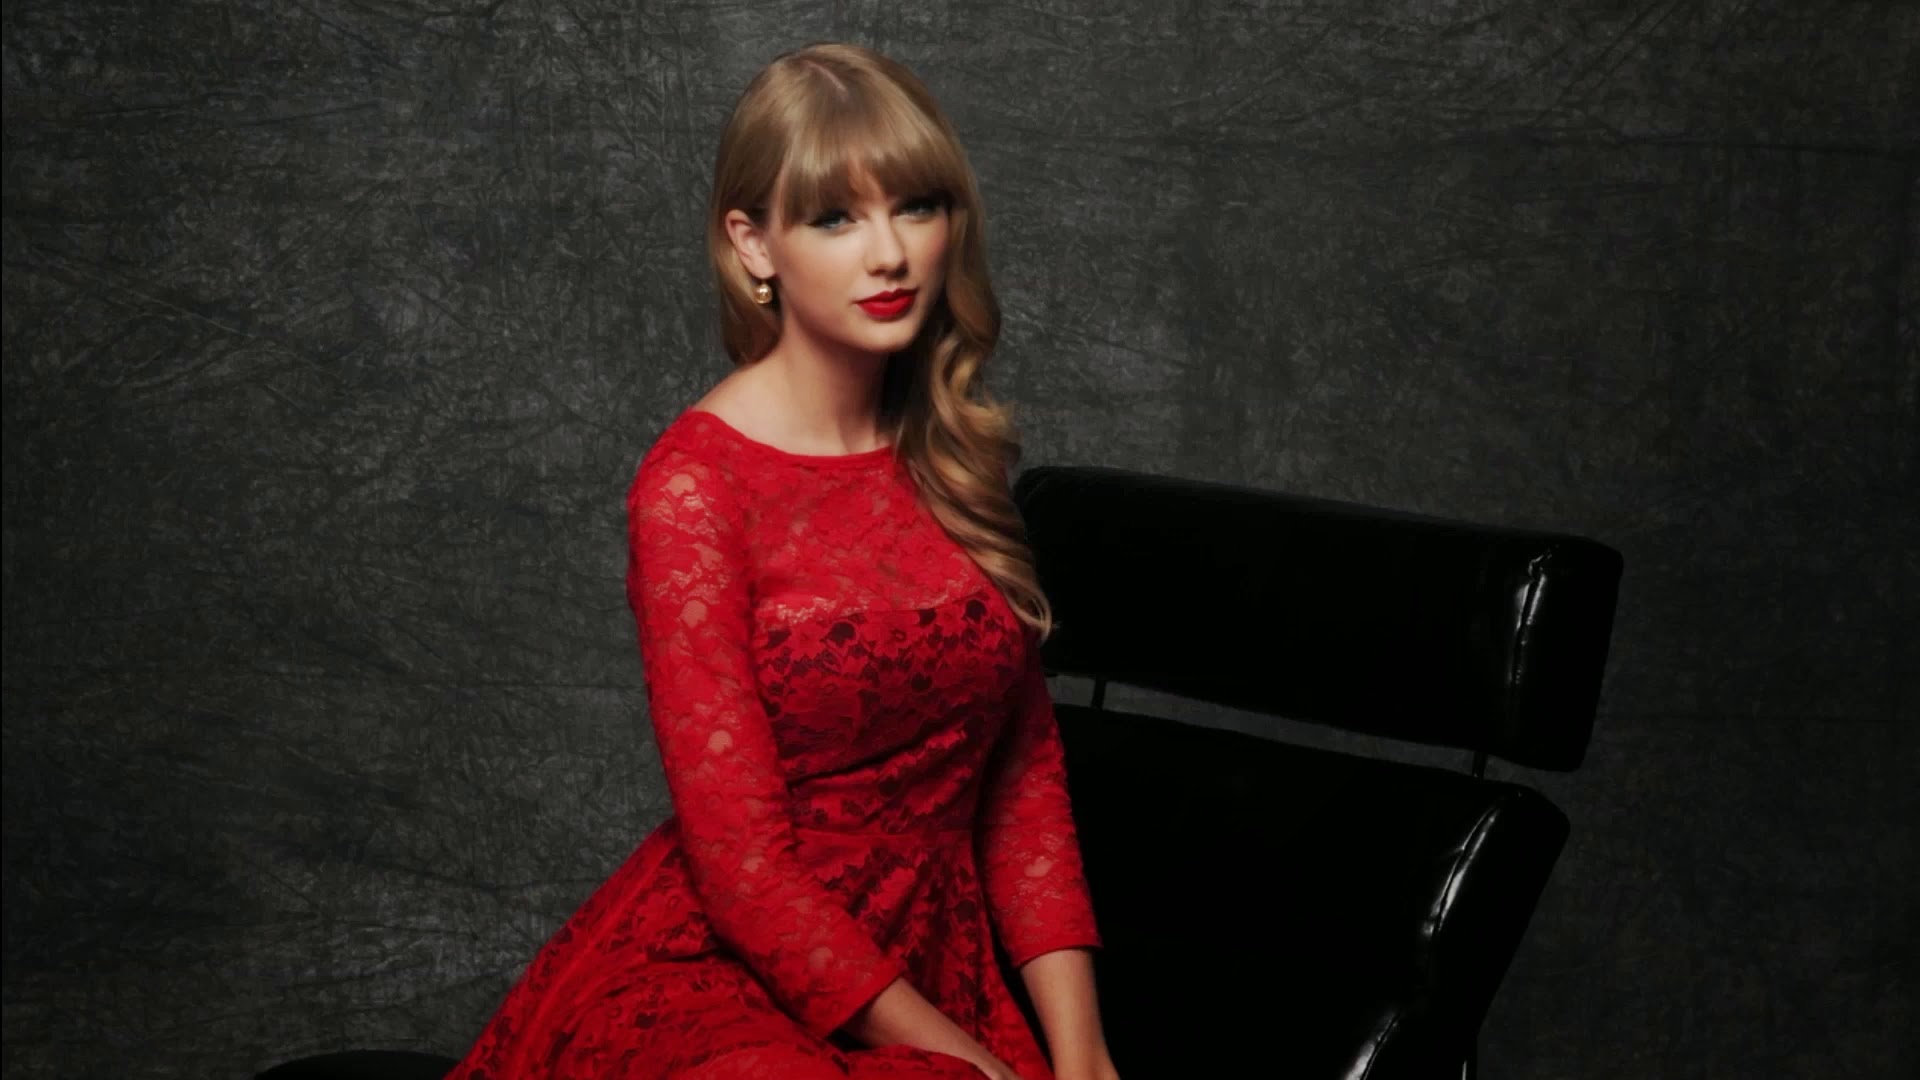 Taylor-Swift-Red-Lace-dress